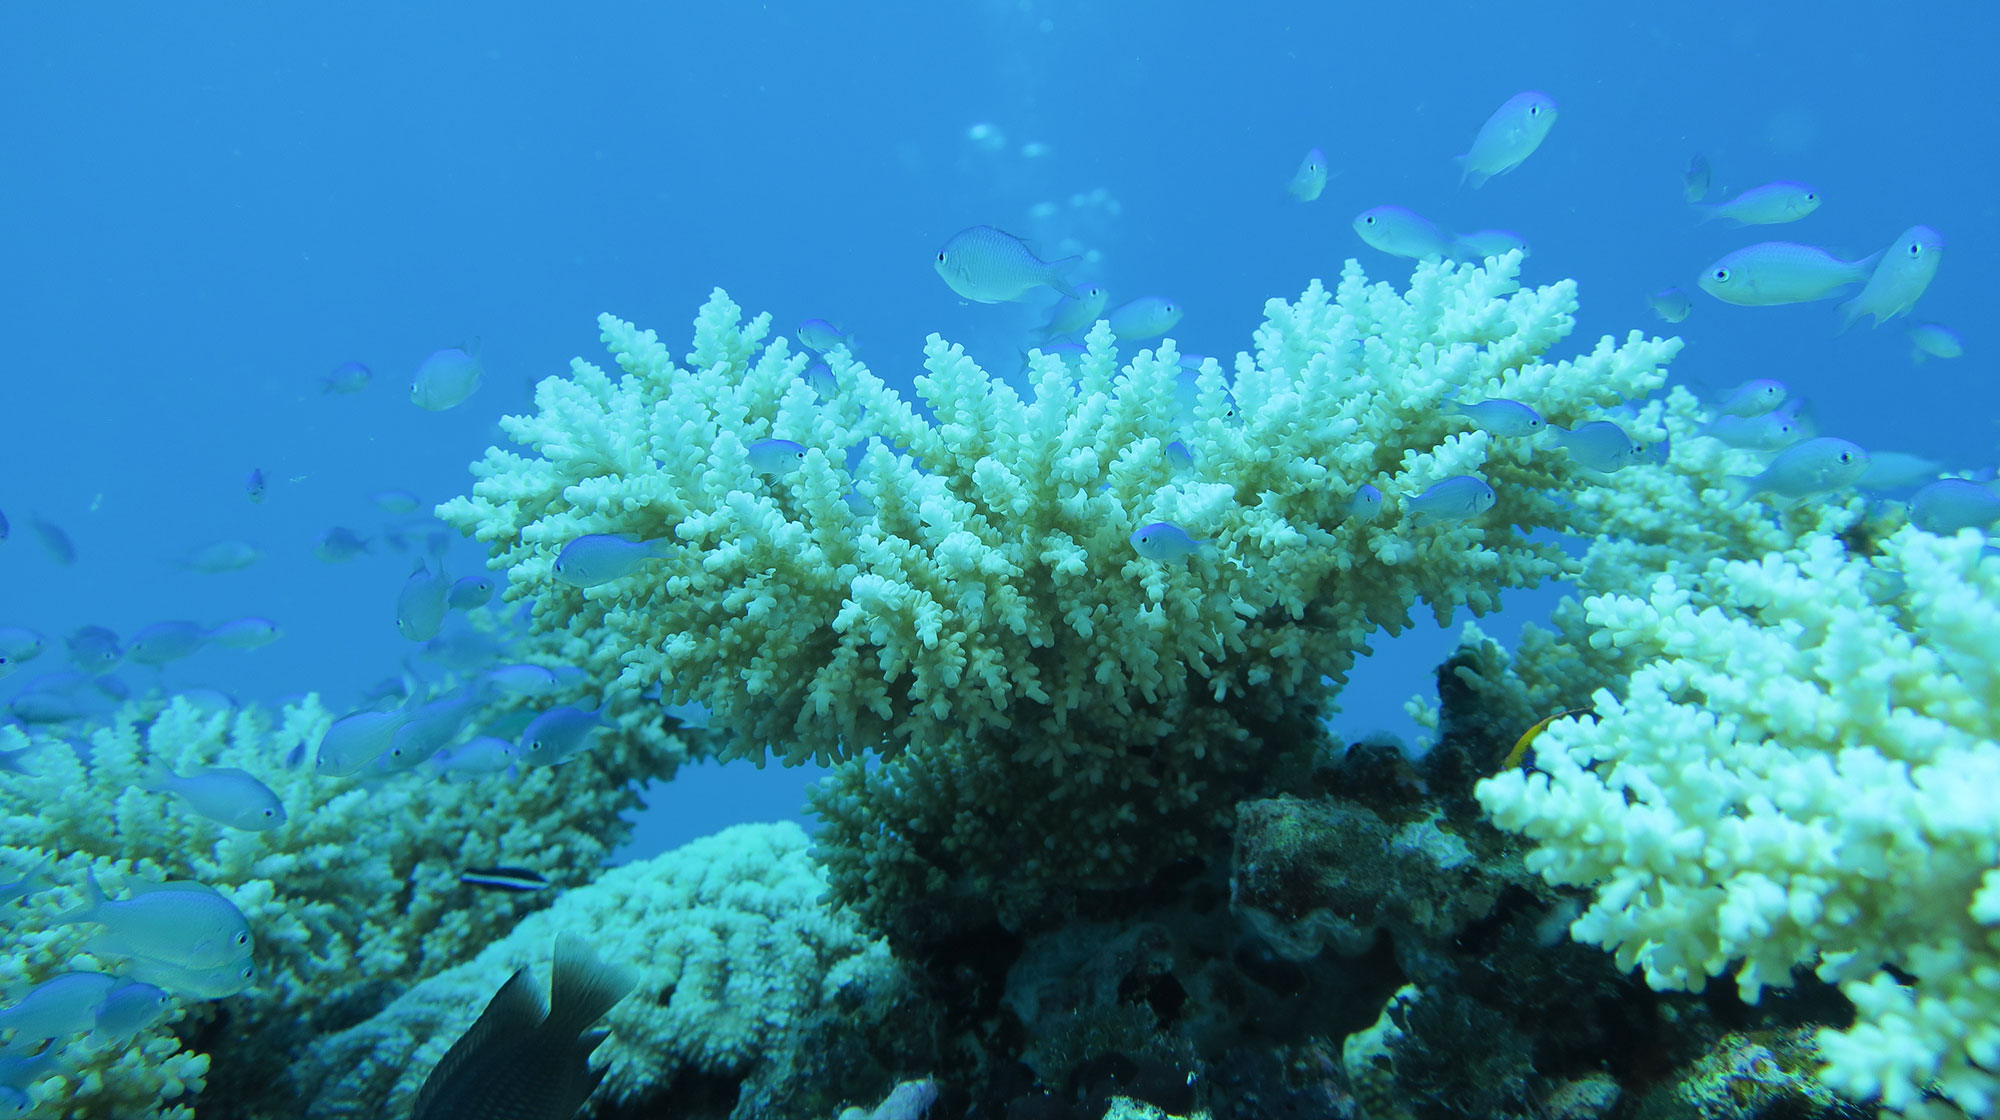 Backtoback heatwaves kill more than twothirds of coral